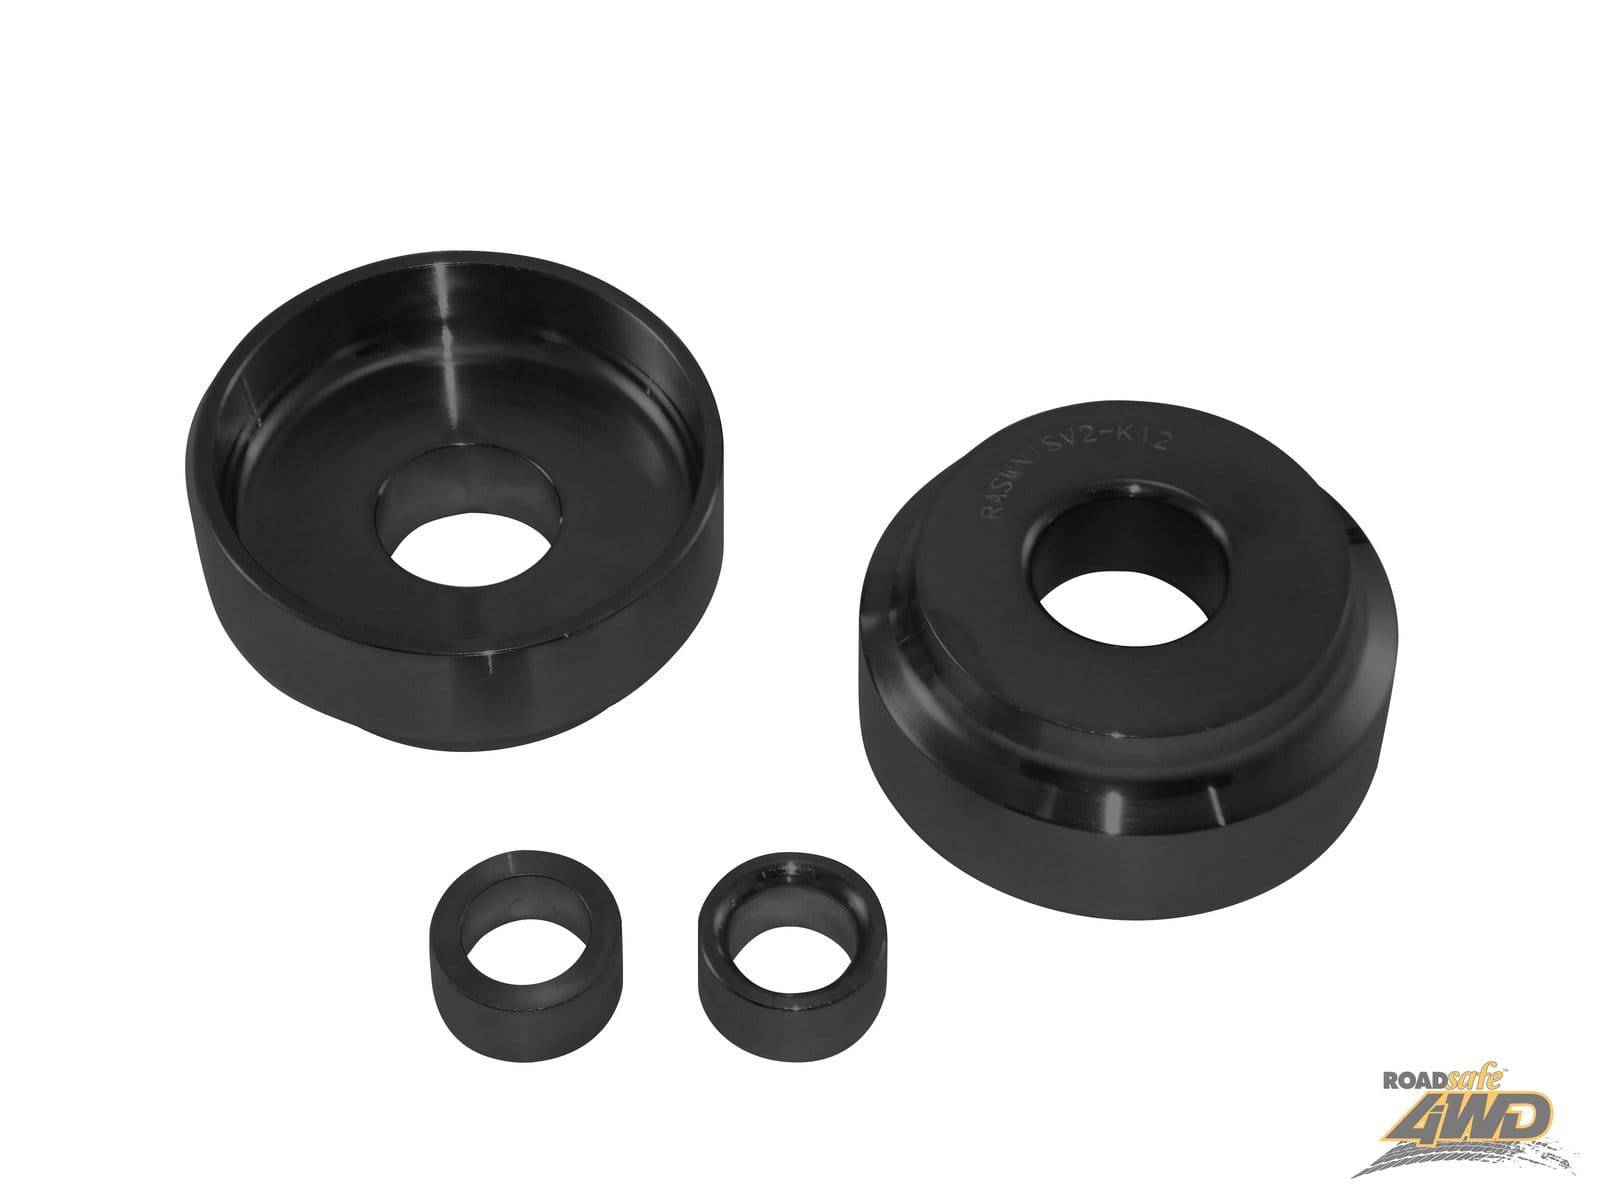 Roadsafe 4wd Radius Arm Spacer / Washer to suit 2" Lift V2 for Nissan Patrol GQ/GU | Roadsafe